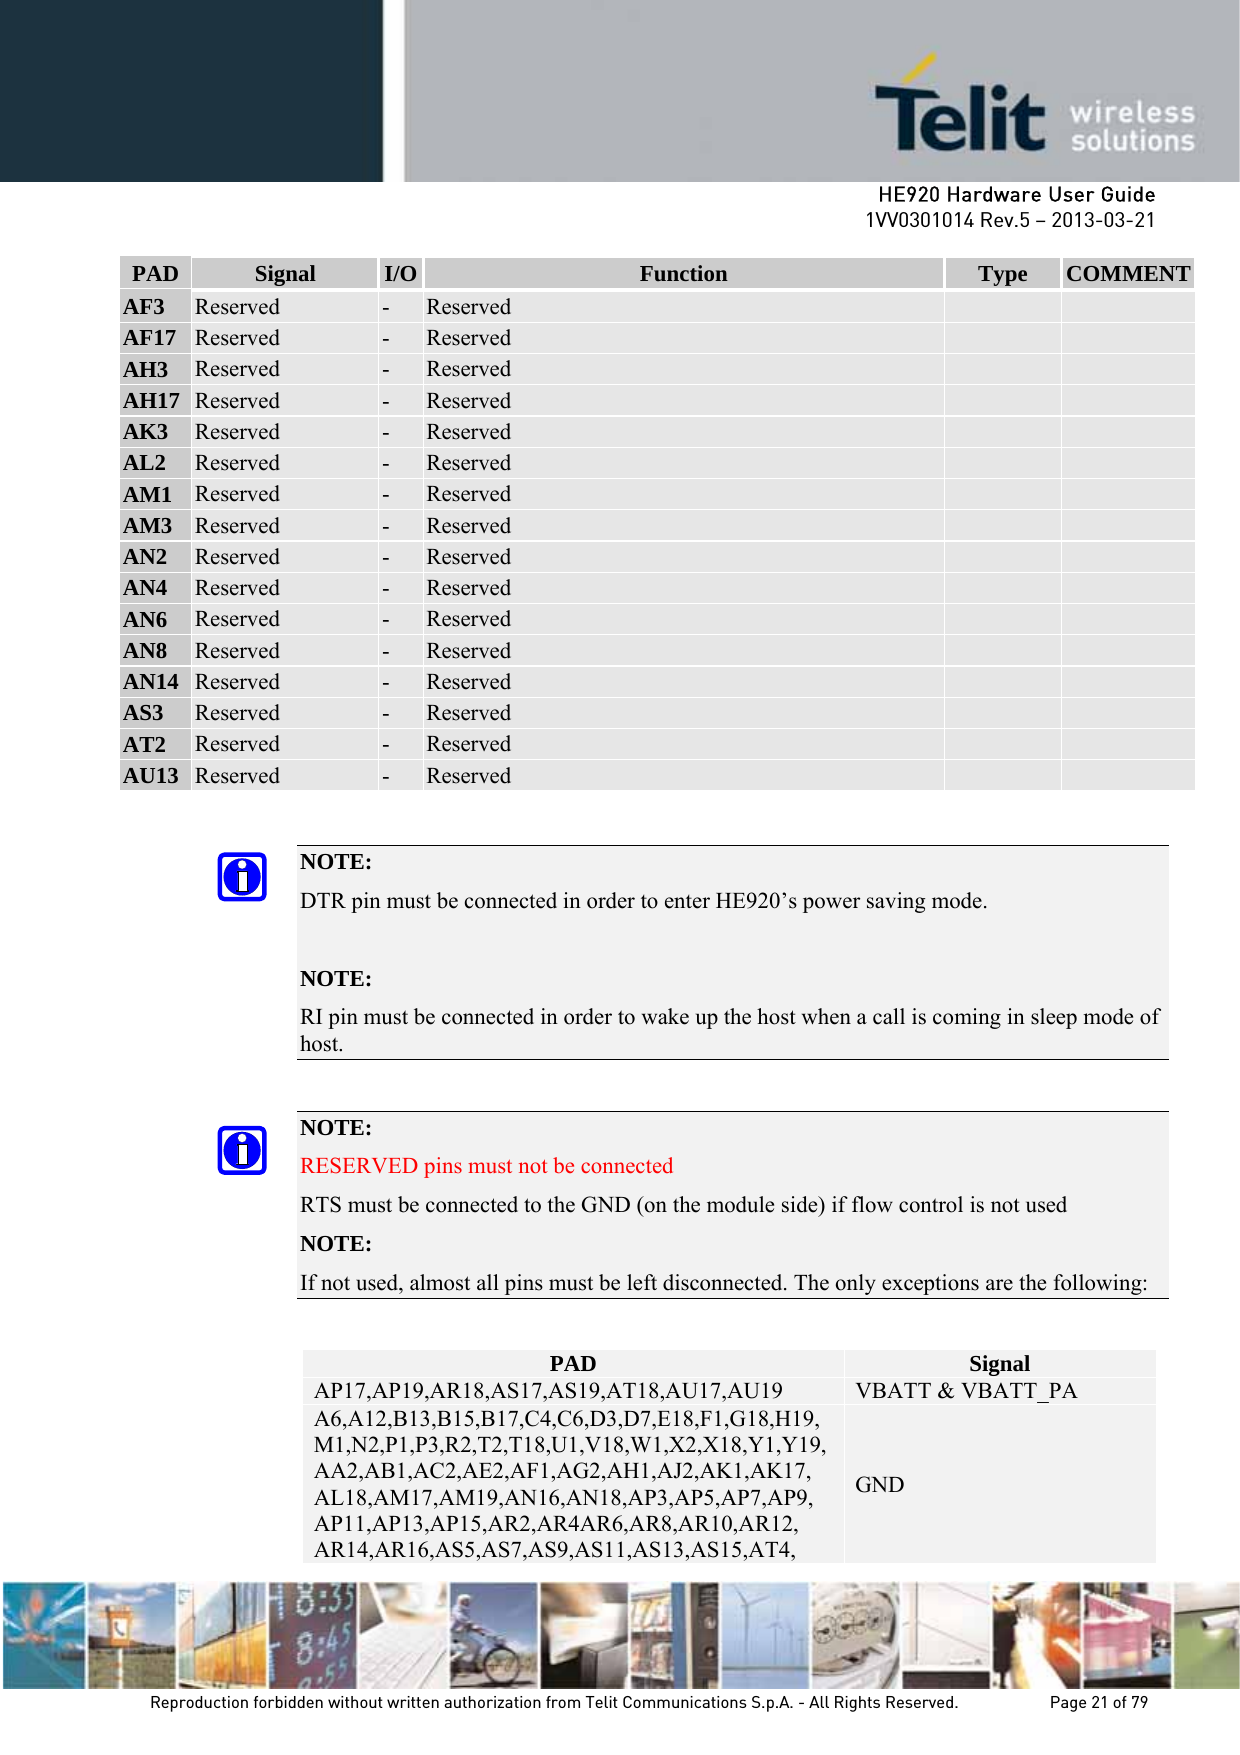     HE920 Hardware User Guide 1VV0301014 Rev.5 – 2013-03-21 Reproduction forbidden without written authorization from Telit Communications S.p.A. - All Rights Reserved.    Page 21 of 79  PAD  Signal  I/O  Function  Type  COMMENTAF3  Reserved  -  Reserved     AF17  Reserved  -  Reserved     AH3  Reserved  -  Reserved     AH17  Reserved  -  Reserved     AK3  Reserved  -  Reserved     AL2  Reserved  -  Reserved     AM1  Reserved  -  Reserved     AM3  Reserved  -  Reserved     AN2  Reserved  -  Reserved     AN4  Reserved  -  Reserved     AN6  Reserved  -  Reserved     AN8  Reserved  -  Reserved     AN14  Reserved  -  Reserved     AS3  Reserved  -  Reserved     AT2  Reserved  -  Reserved     AU13  Reserved  -  Reserved      NOTE:  DTR pin must be connected in order to enter HE920’s power saving mode.  NOTE: RI pin must be connected in order to wake up the host when a call is coming in sleep mode of host.  NOTE:  RESERVED pins must not be connected RTS must be connected to the GND (on the module side) if flow control is not used   NOTE: If not used, almost all pins must be left disconnected. The only exceptions are the following:  PAD  Signal AP17,AP19,AR18,AS17,AS19,AT18,AU17,AU19  VBATT &amp; VBATT_PA A6,A12,B13,B15,B17,C4,C6,D3,D7,E18,F1,G18,H19,M1,N2,P1,P3,R2,T2,T18,U1,V18,W1,X2,X18,Y1,Y19,AA2,AB1,AC2,AE2,AF1,AG2,AH1,AJ2,AK1,AK17, AL18,AM17,AM19,AN16,AN18,AP3,AP5,AP7,AP9, AP11,AP13,AP15,AR2,AR4AR6,AR8,AR10,AR12, AR14,AR16,AS5,AS7,AS9,AS11,AS13,AS15,AT4, GND 